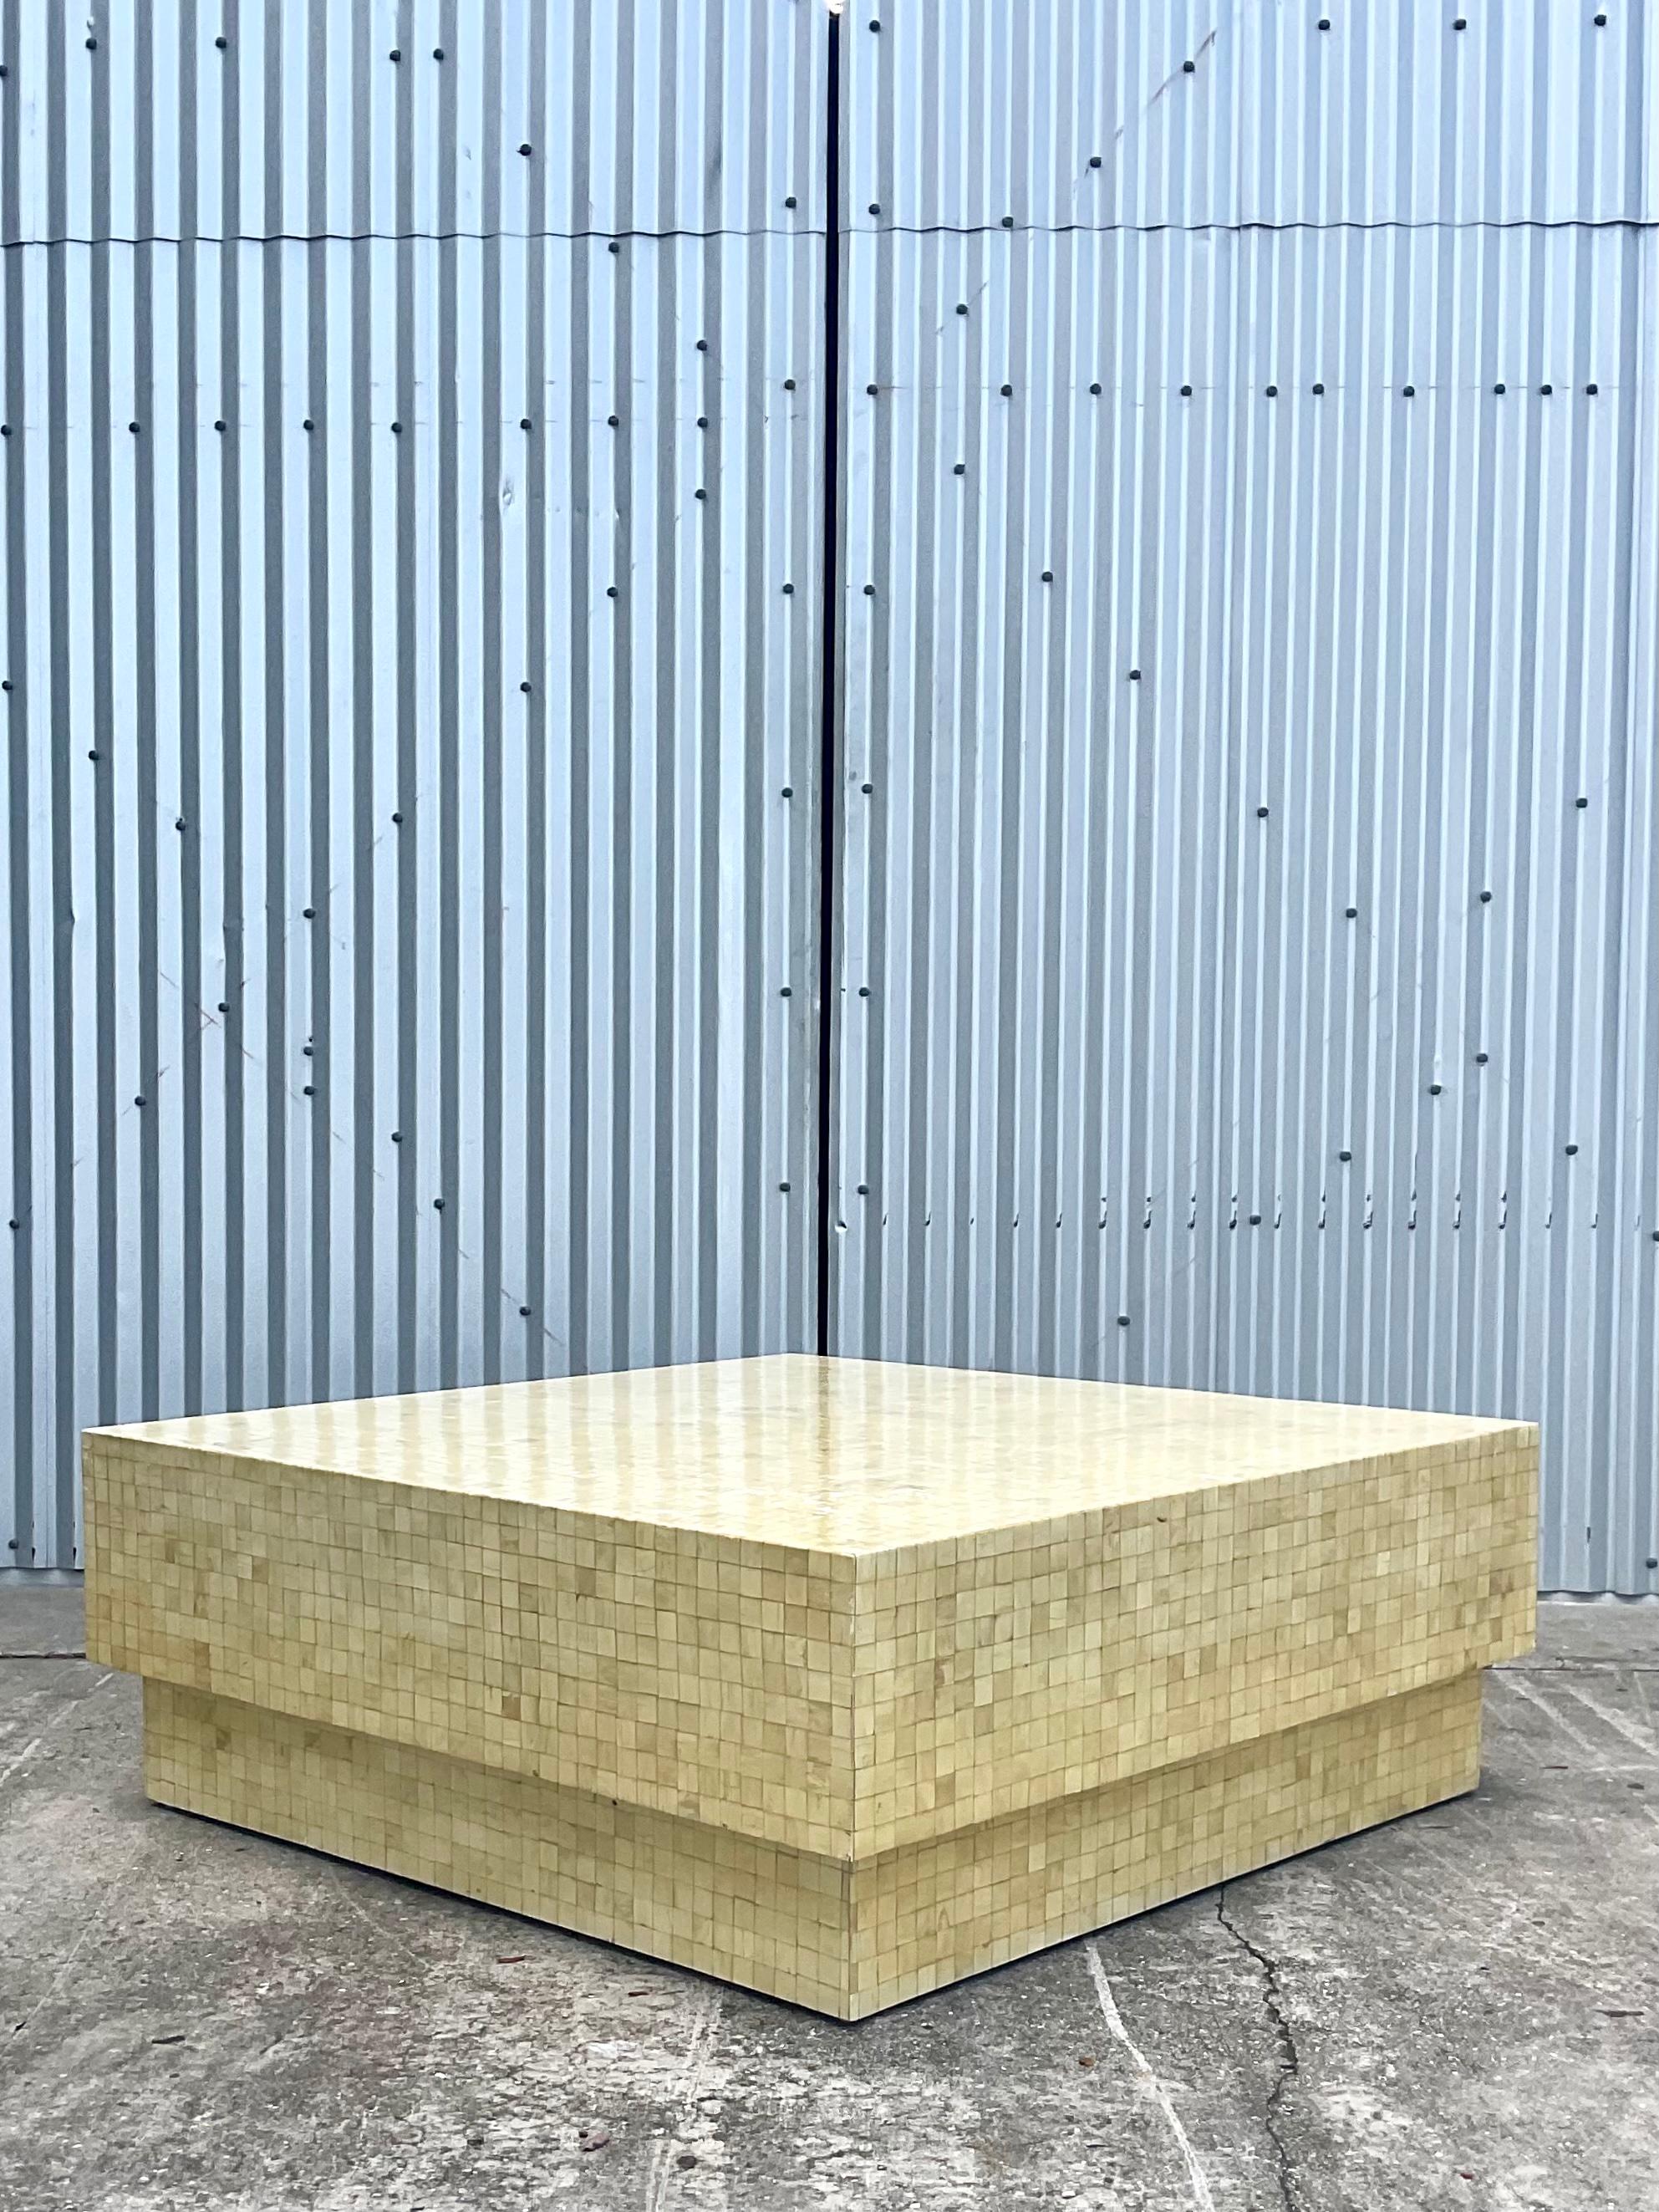 Incredible vintage Organic Modern coffee table. Beautiful tessellated bone in a double decker design. A real showstopper. Acquired from a Palm Beach estate.